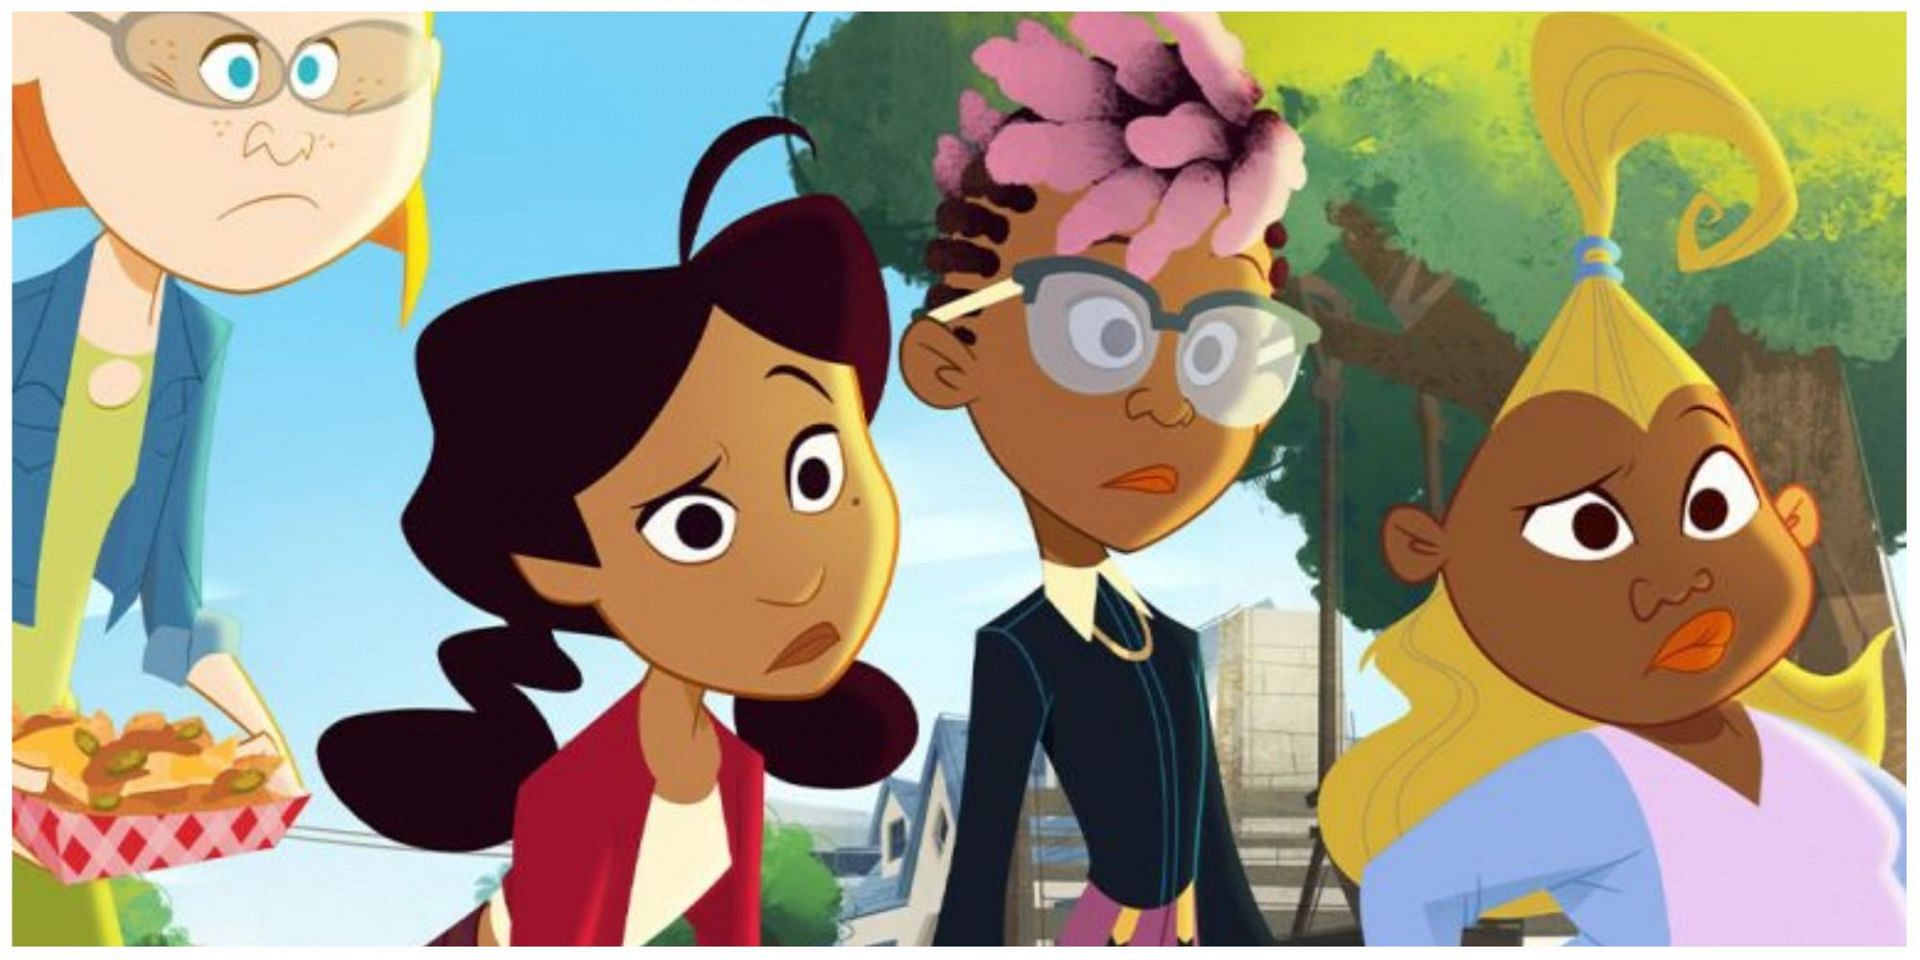 Social media users slammed Disney and the creators of &quot;The Proud Family&quot; for claiming America was &lsquo;built on slavery.